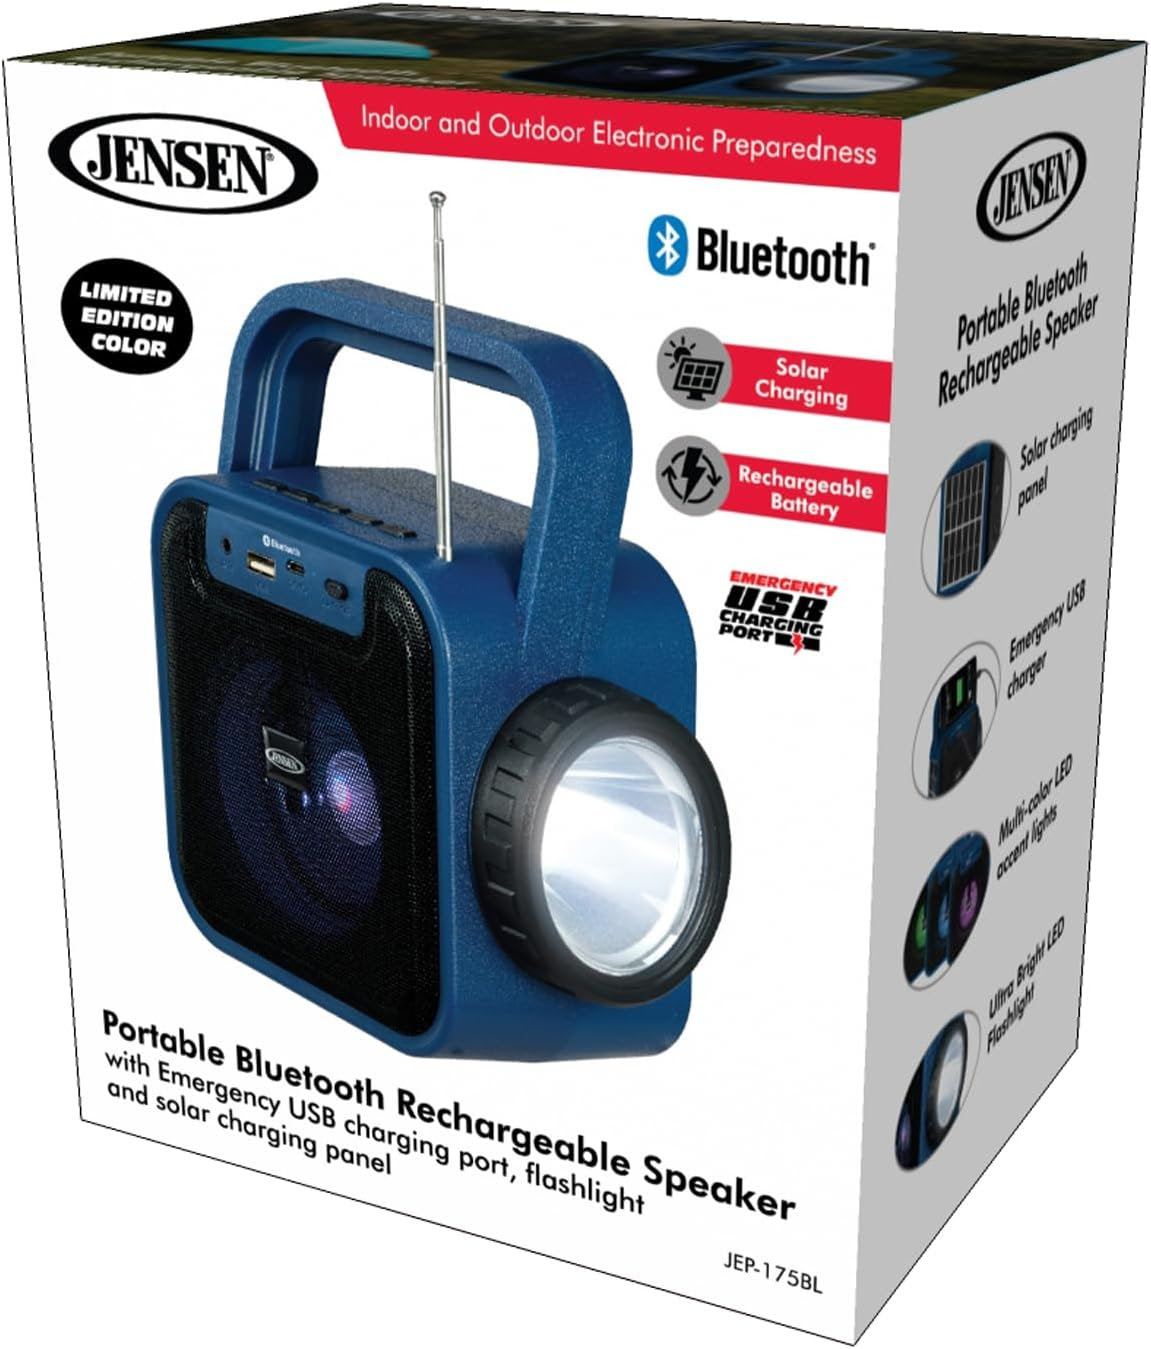 Jensen Portable Bluetooth Rechargeable Speaker with Built-in Emergency USB Charging Port, FM Radio, Flashlight & Solar Charging. 3000units. EXW Los Angeles $12.00unit.